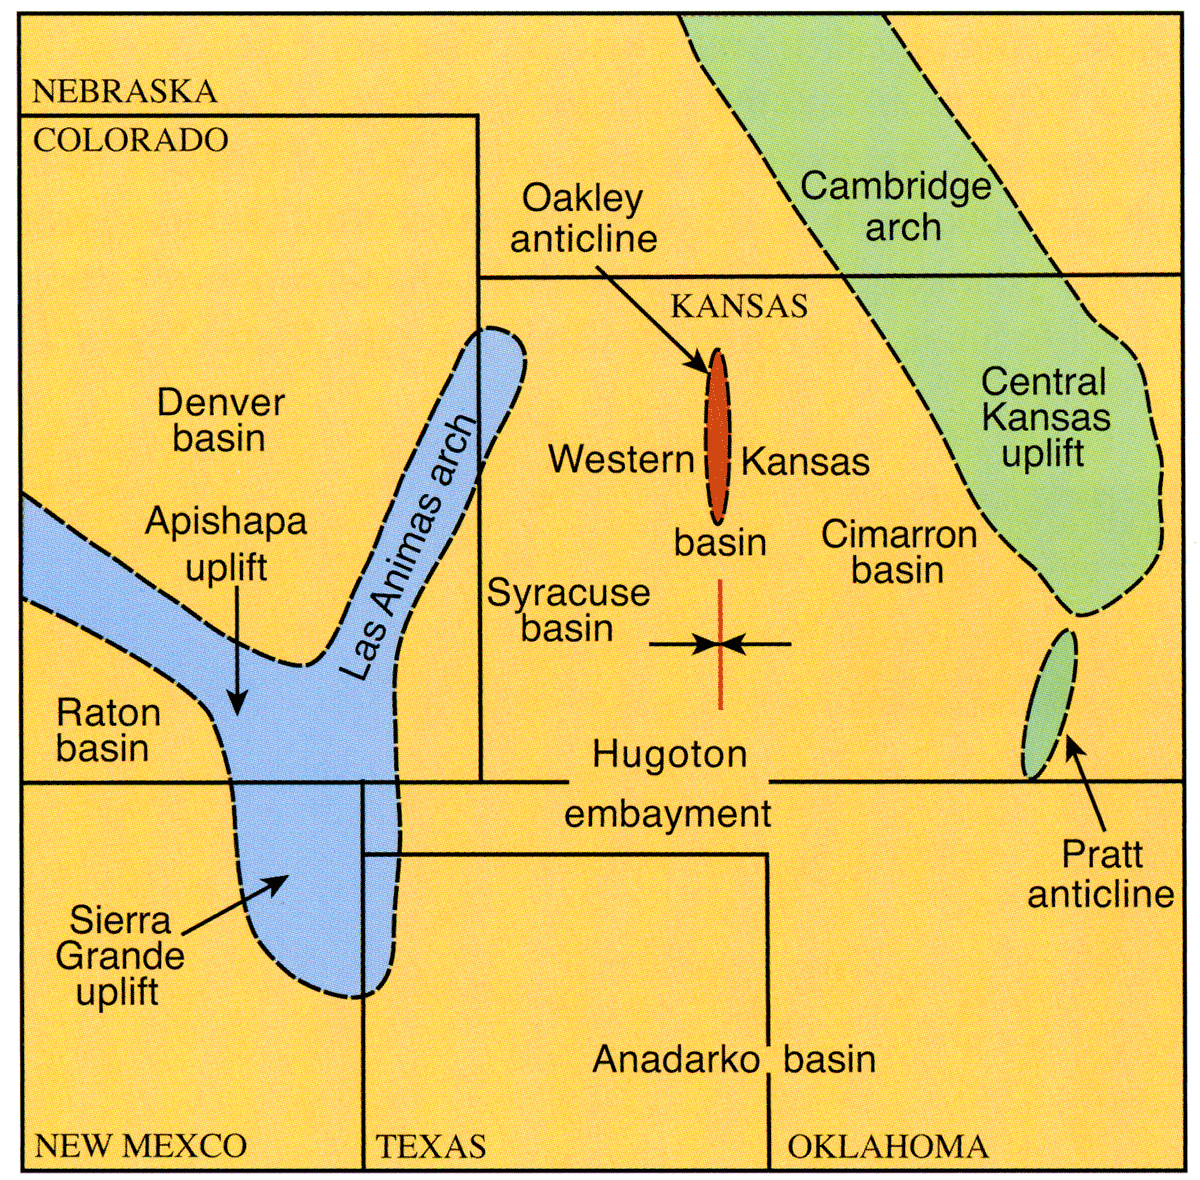 Major elements of the western part of the central Great Plains that were structurally active during late Paleozoic and the Mesozoic time.